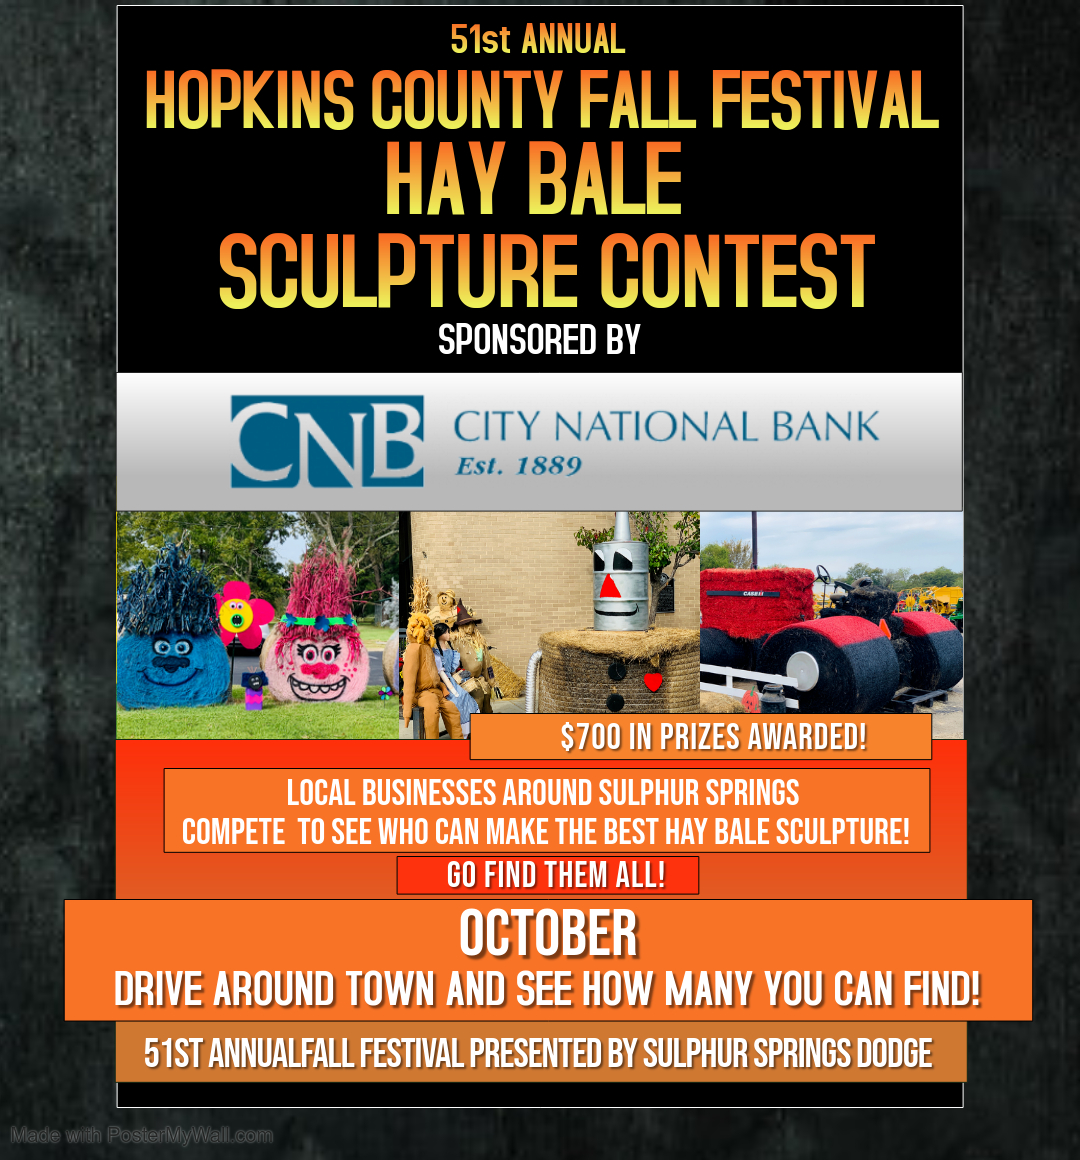 Sign-Ups Begin for 2020 Hopkins County Fall Festival Hay Bale Sculpture Contest!